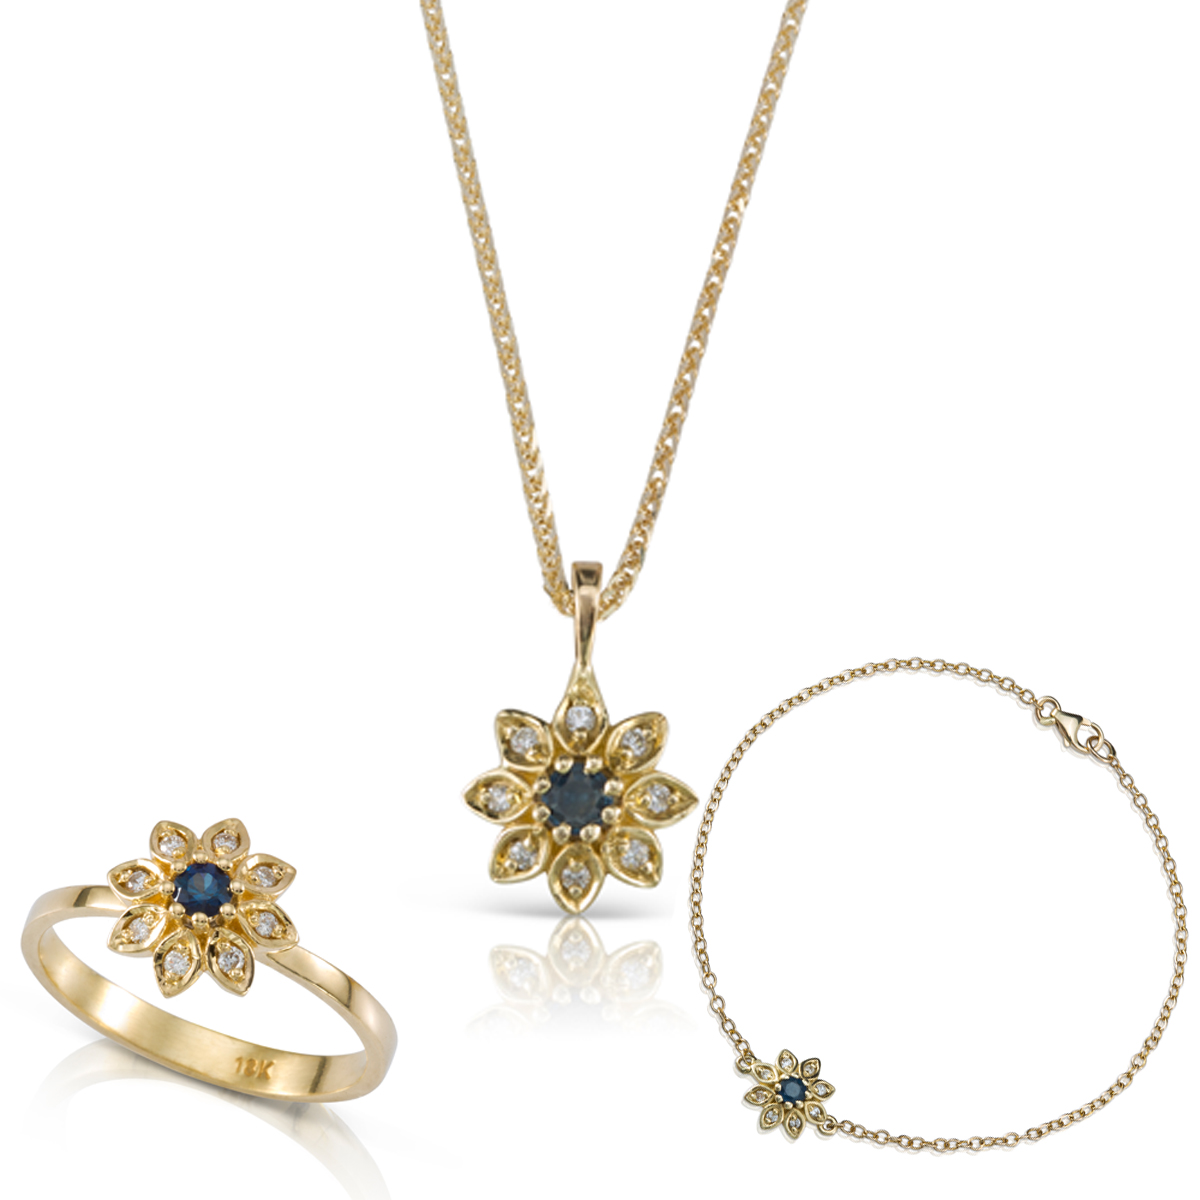 A set of gold flower jewelry